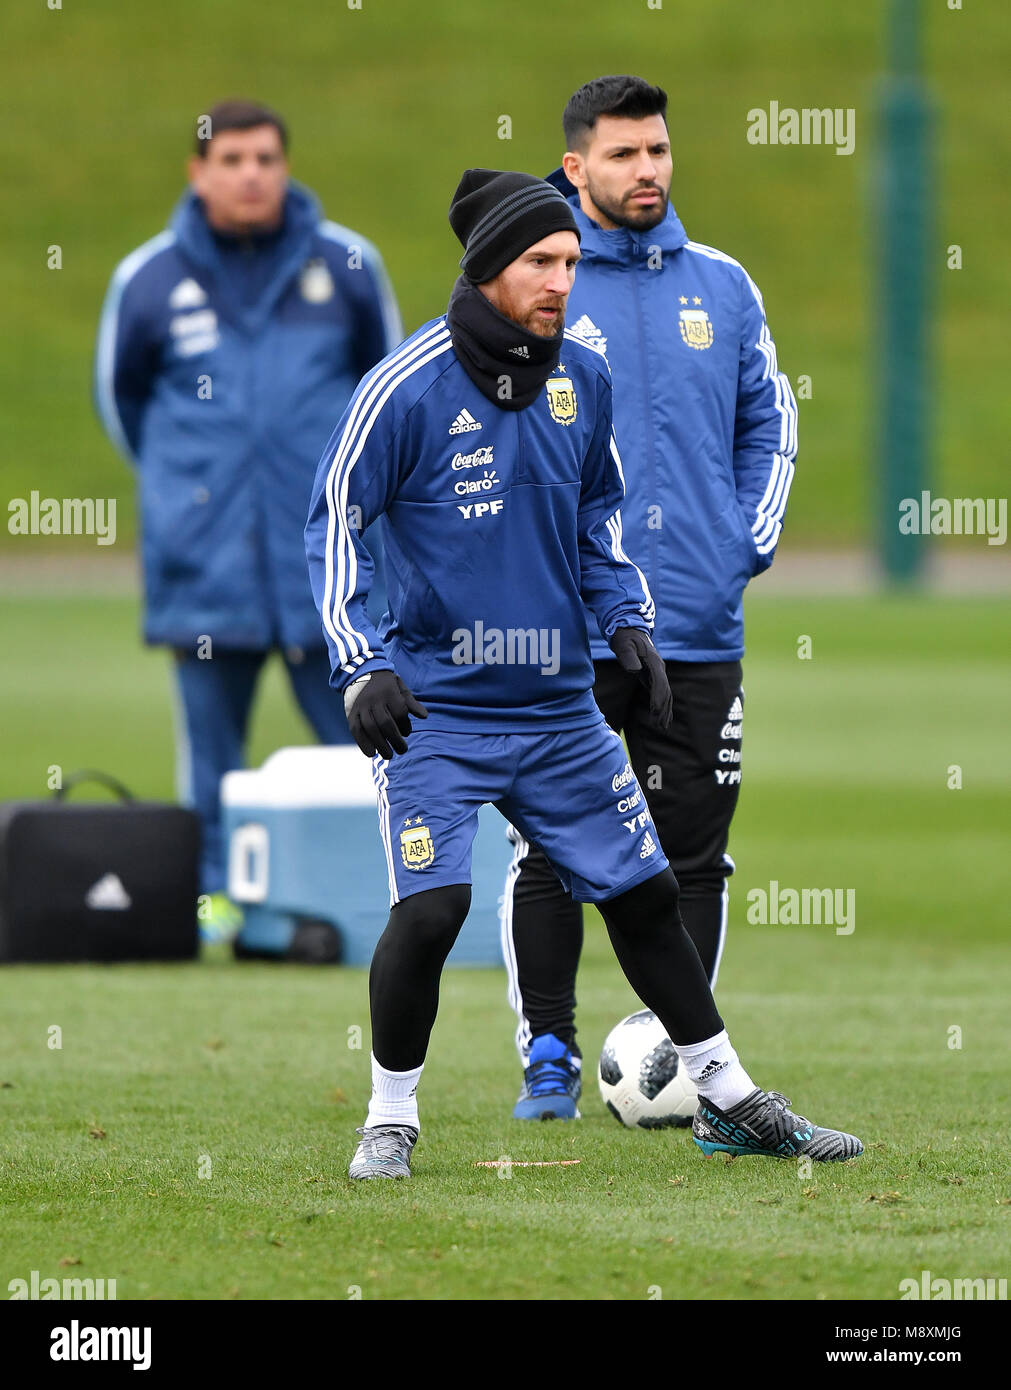 Argentina's Sergio Aguero and Lionel Messi (left) during a training session at the City football Academy, Manchester. Stock Photo